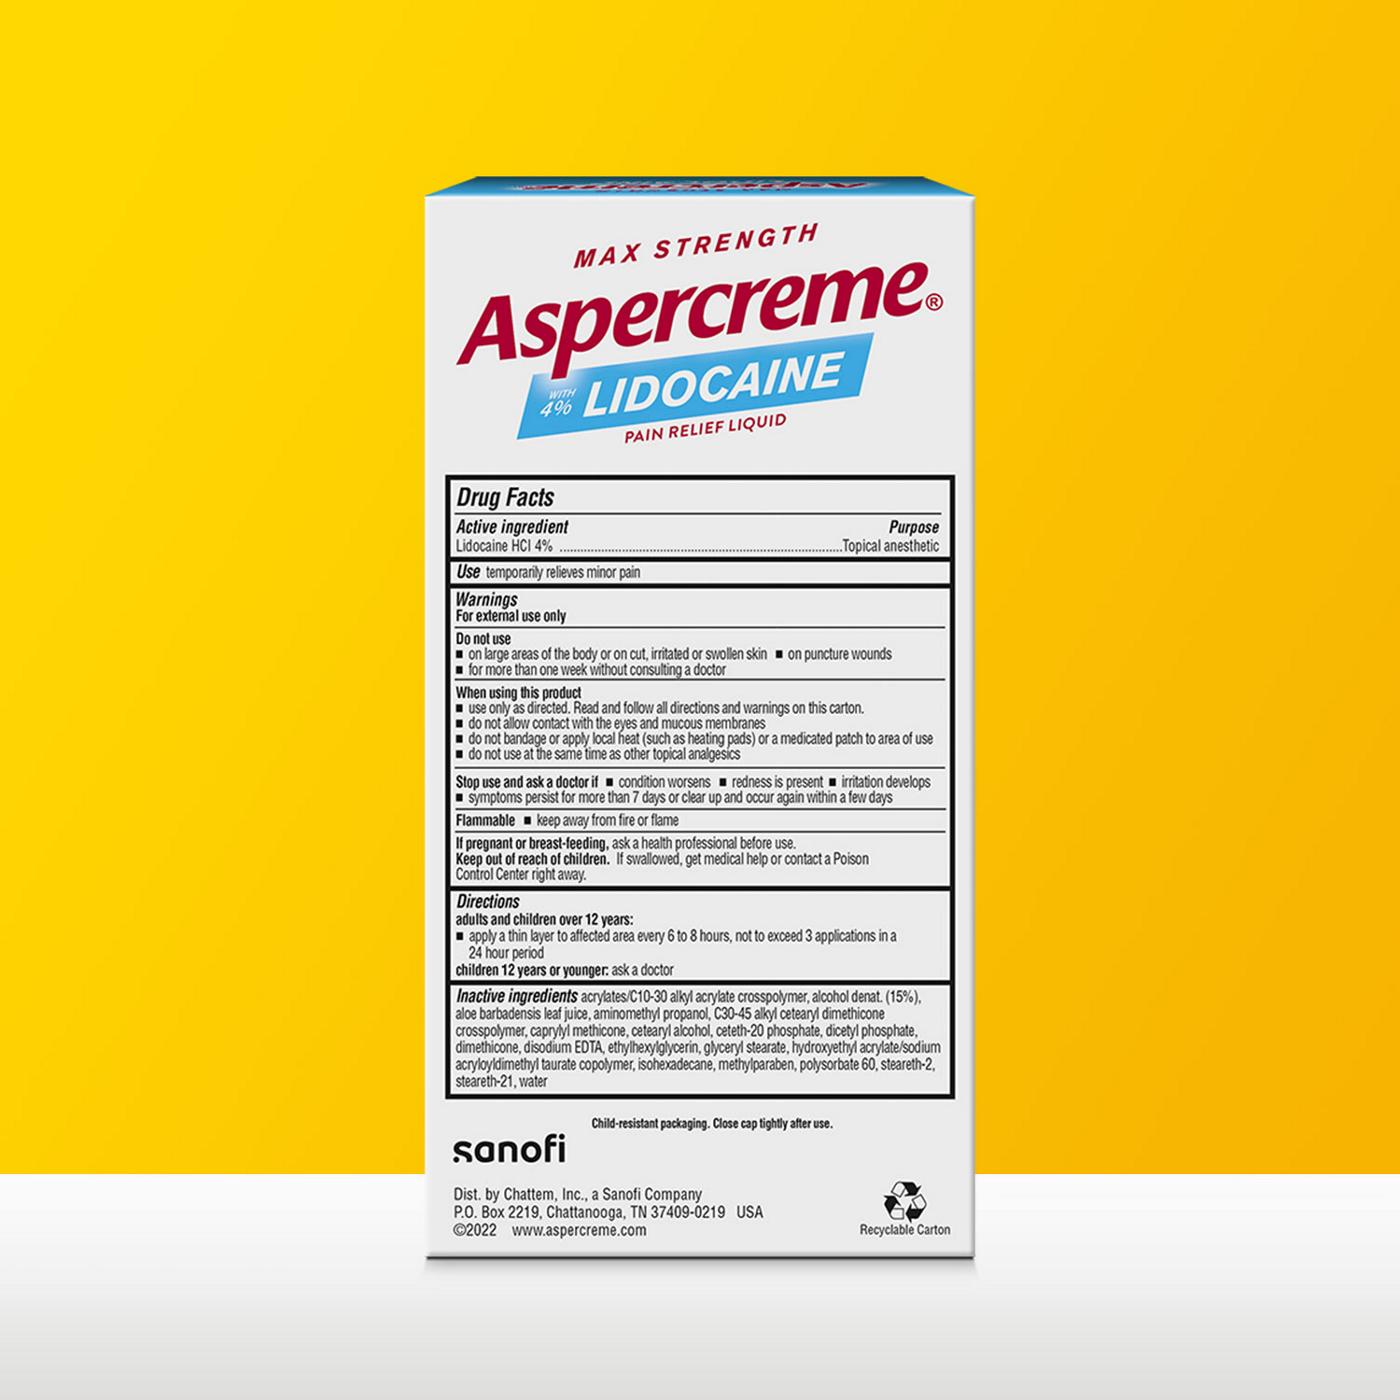 Aspercreme Lidocaine Pain Relief Roll-On; image 6 of 7